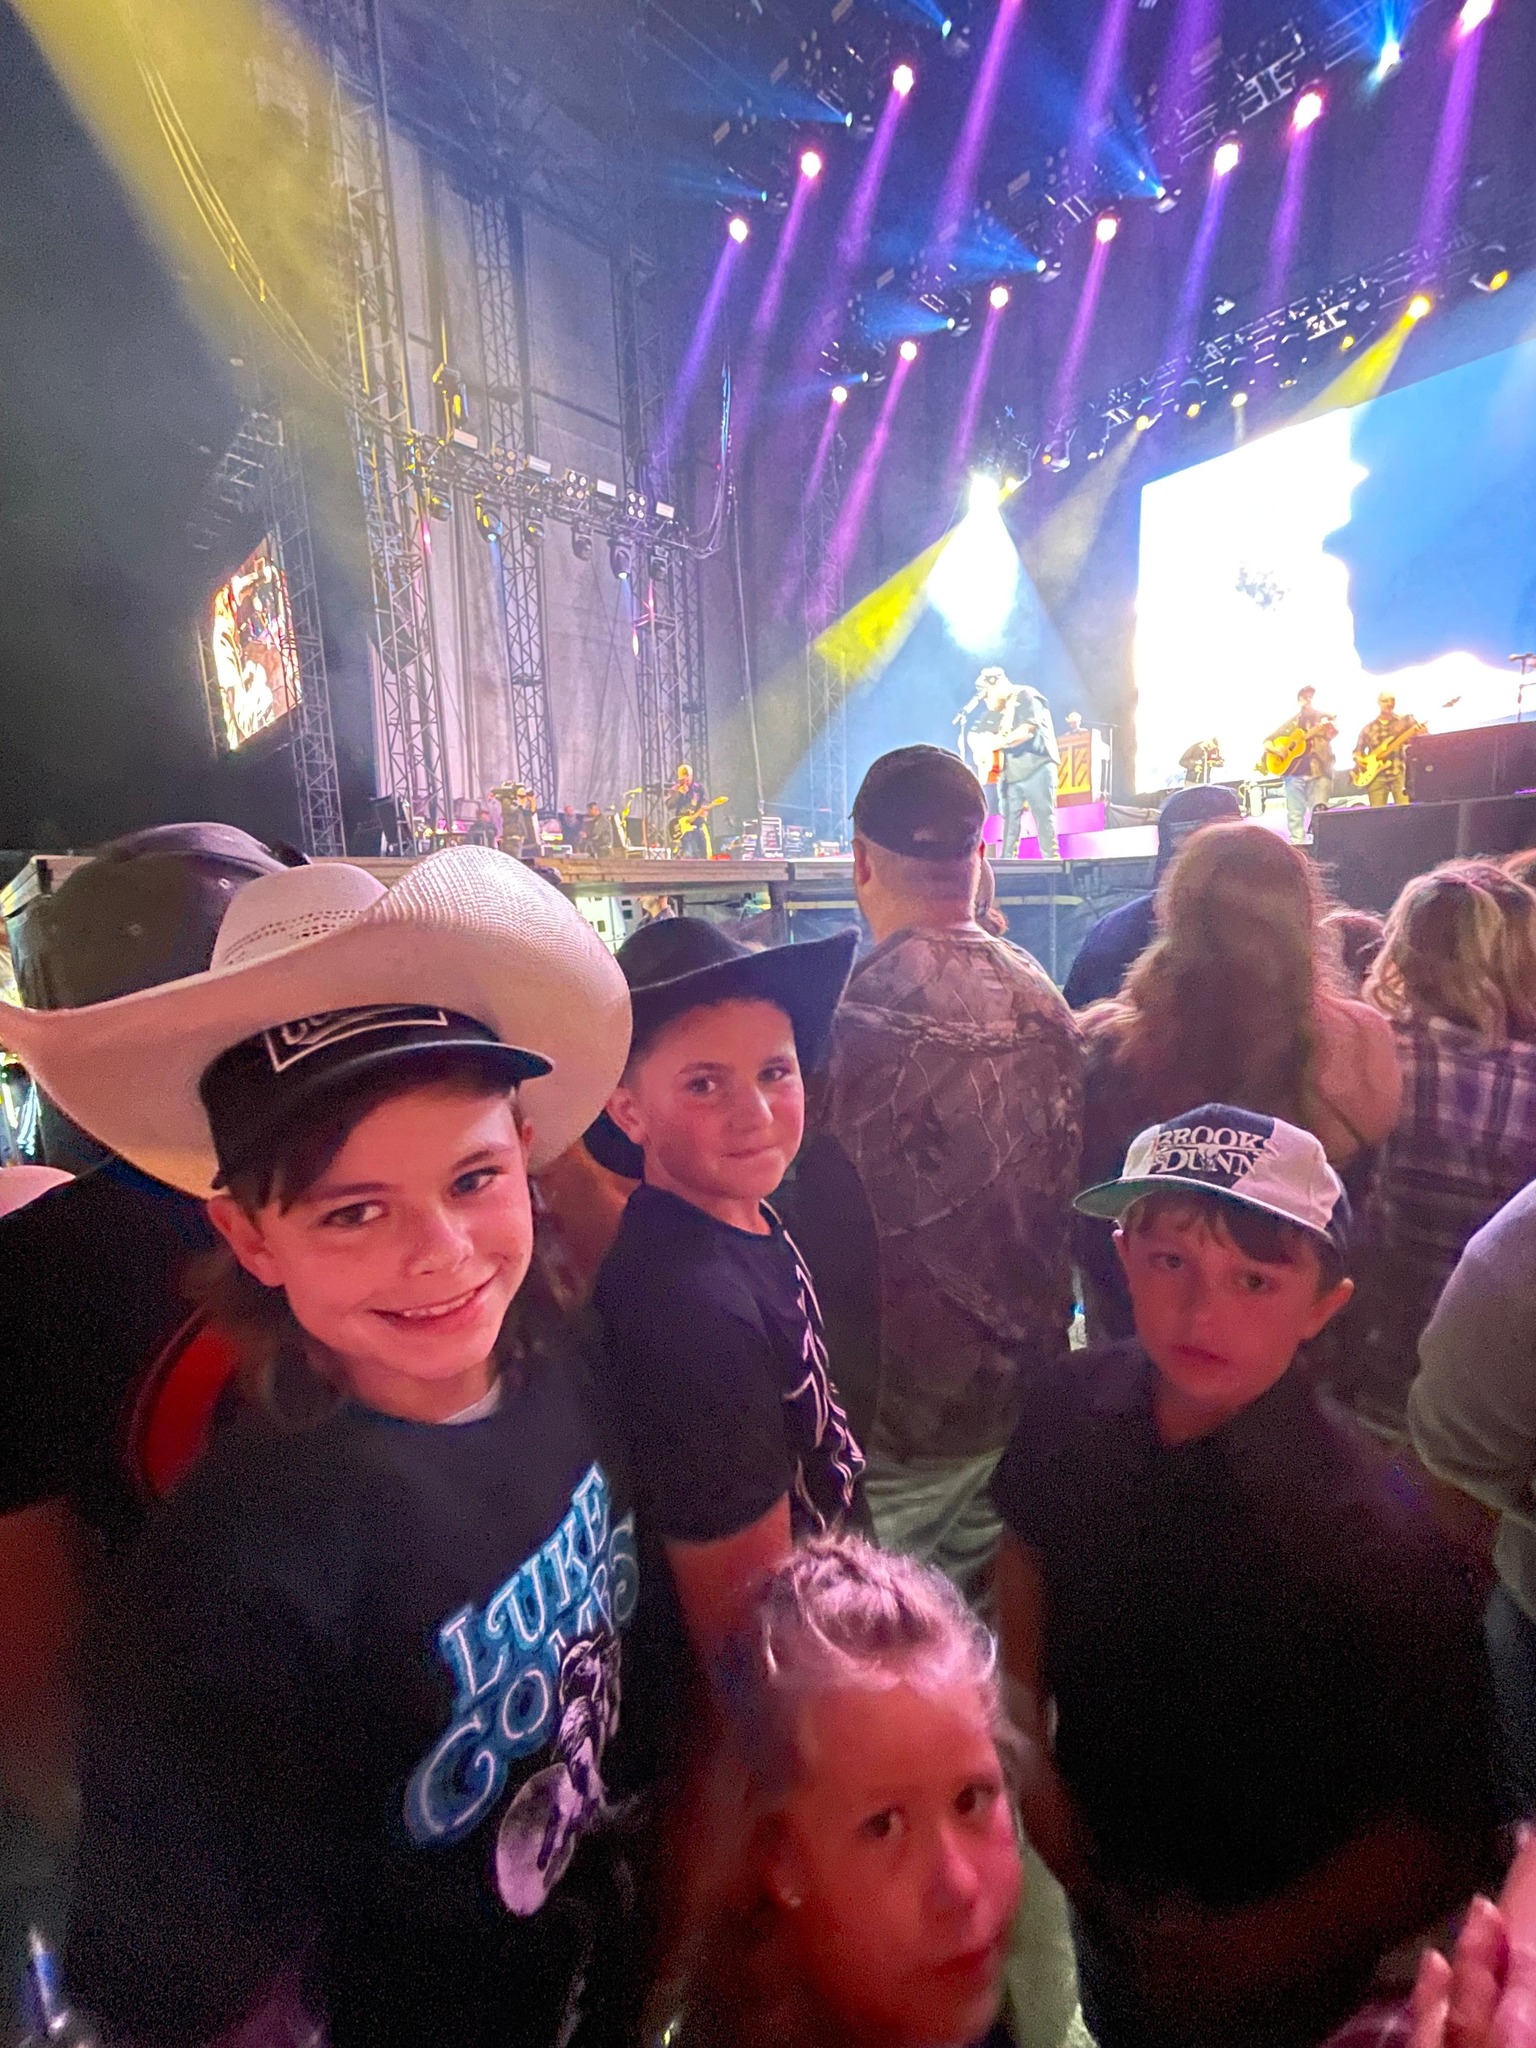 bo fenderson, tanner, and two other kids posing for a photo at the luke combs concert. the stage is just a few feet away from them.